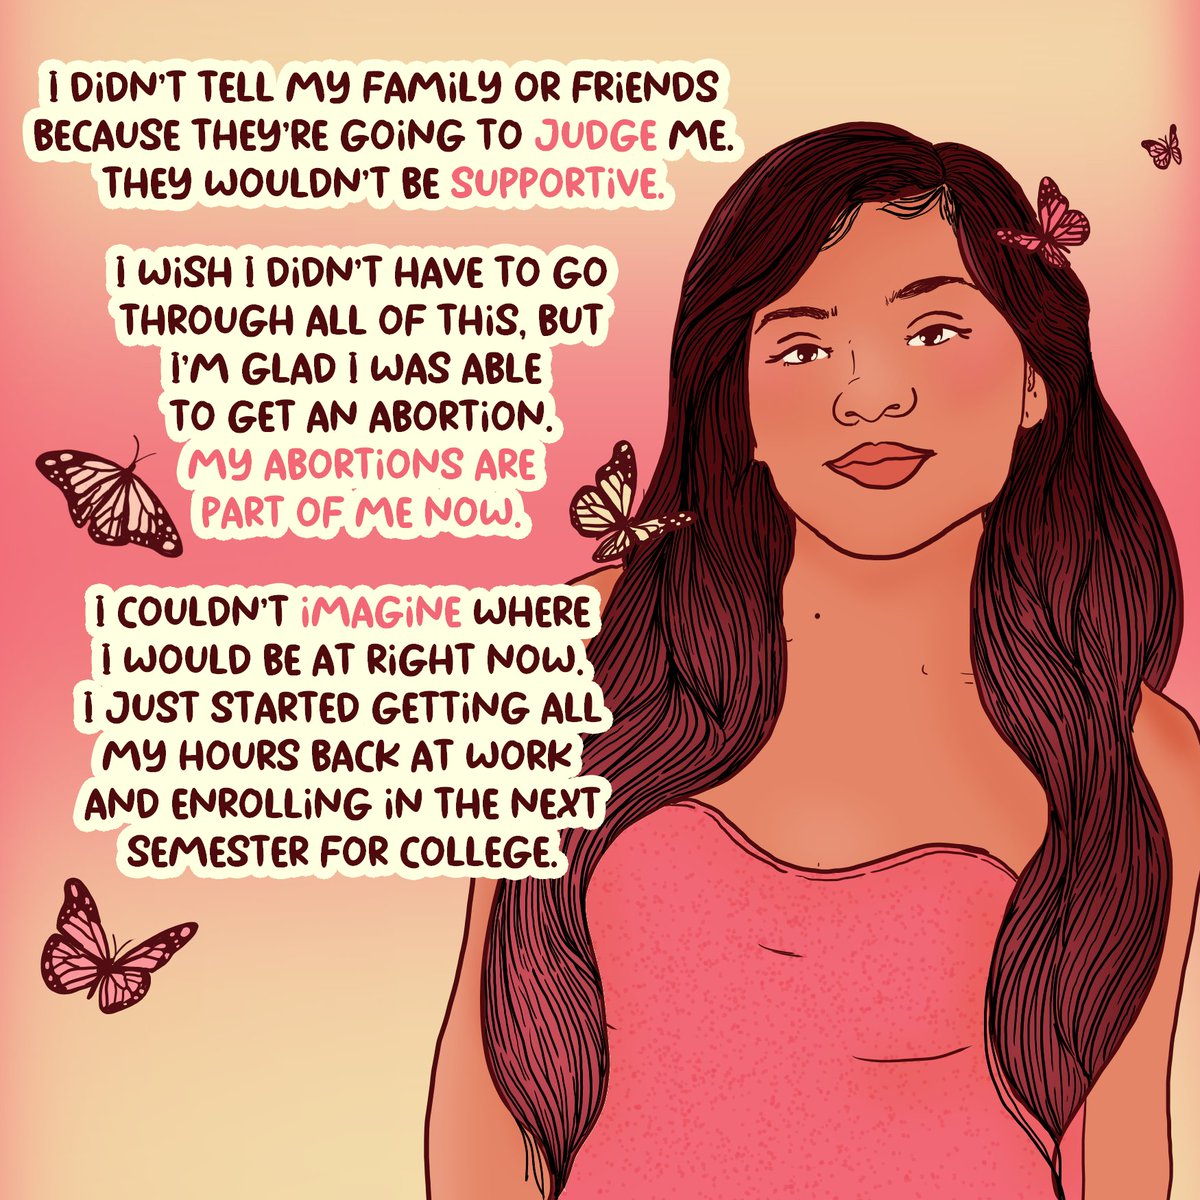 I didn’t tell my family or friends because they’re going to judge me. They wouldn’t be supportive. I wish I didn’t have to go through all of this, but I’m glad I was able to get an abortion. My abortions are now part of me now. I couldn’t imagine where I would be at right now.